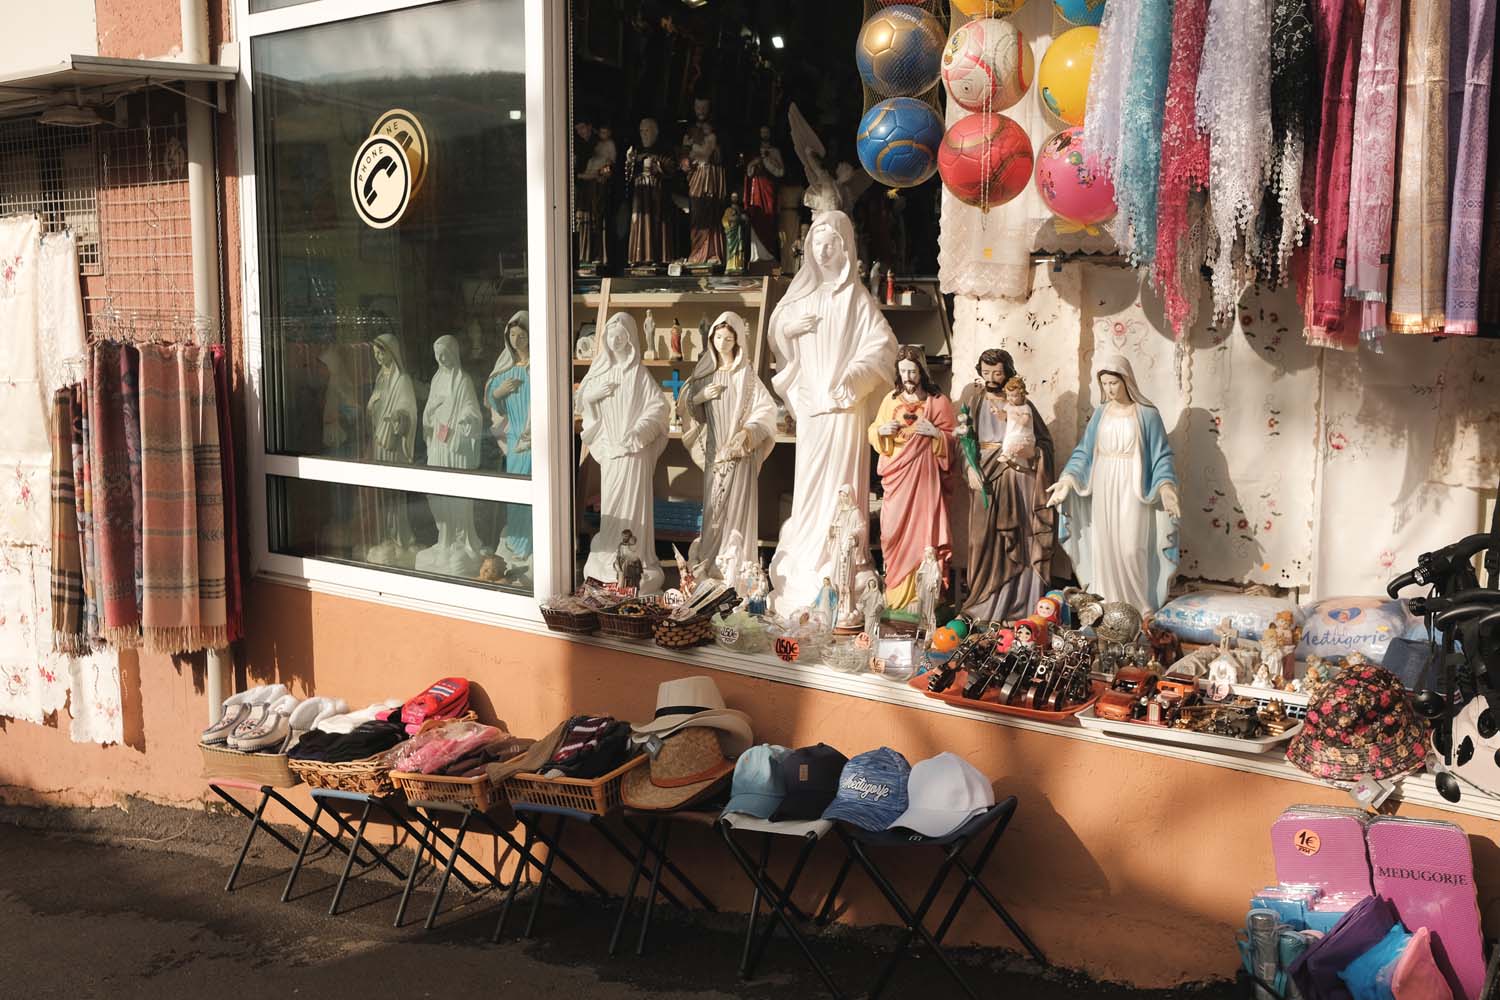 A store selling religious souvenirs and icons. November 2019.